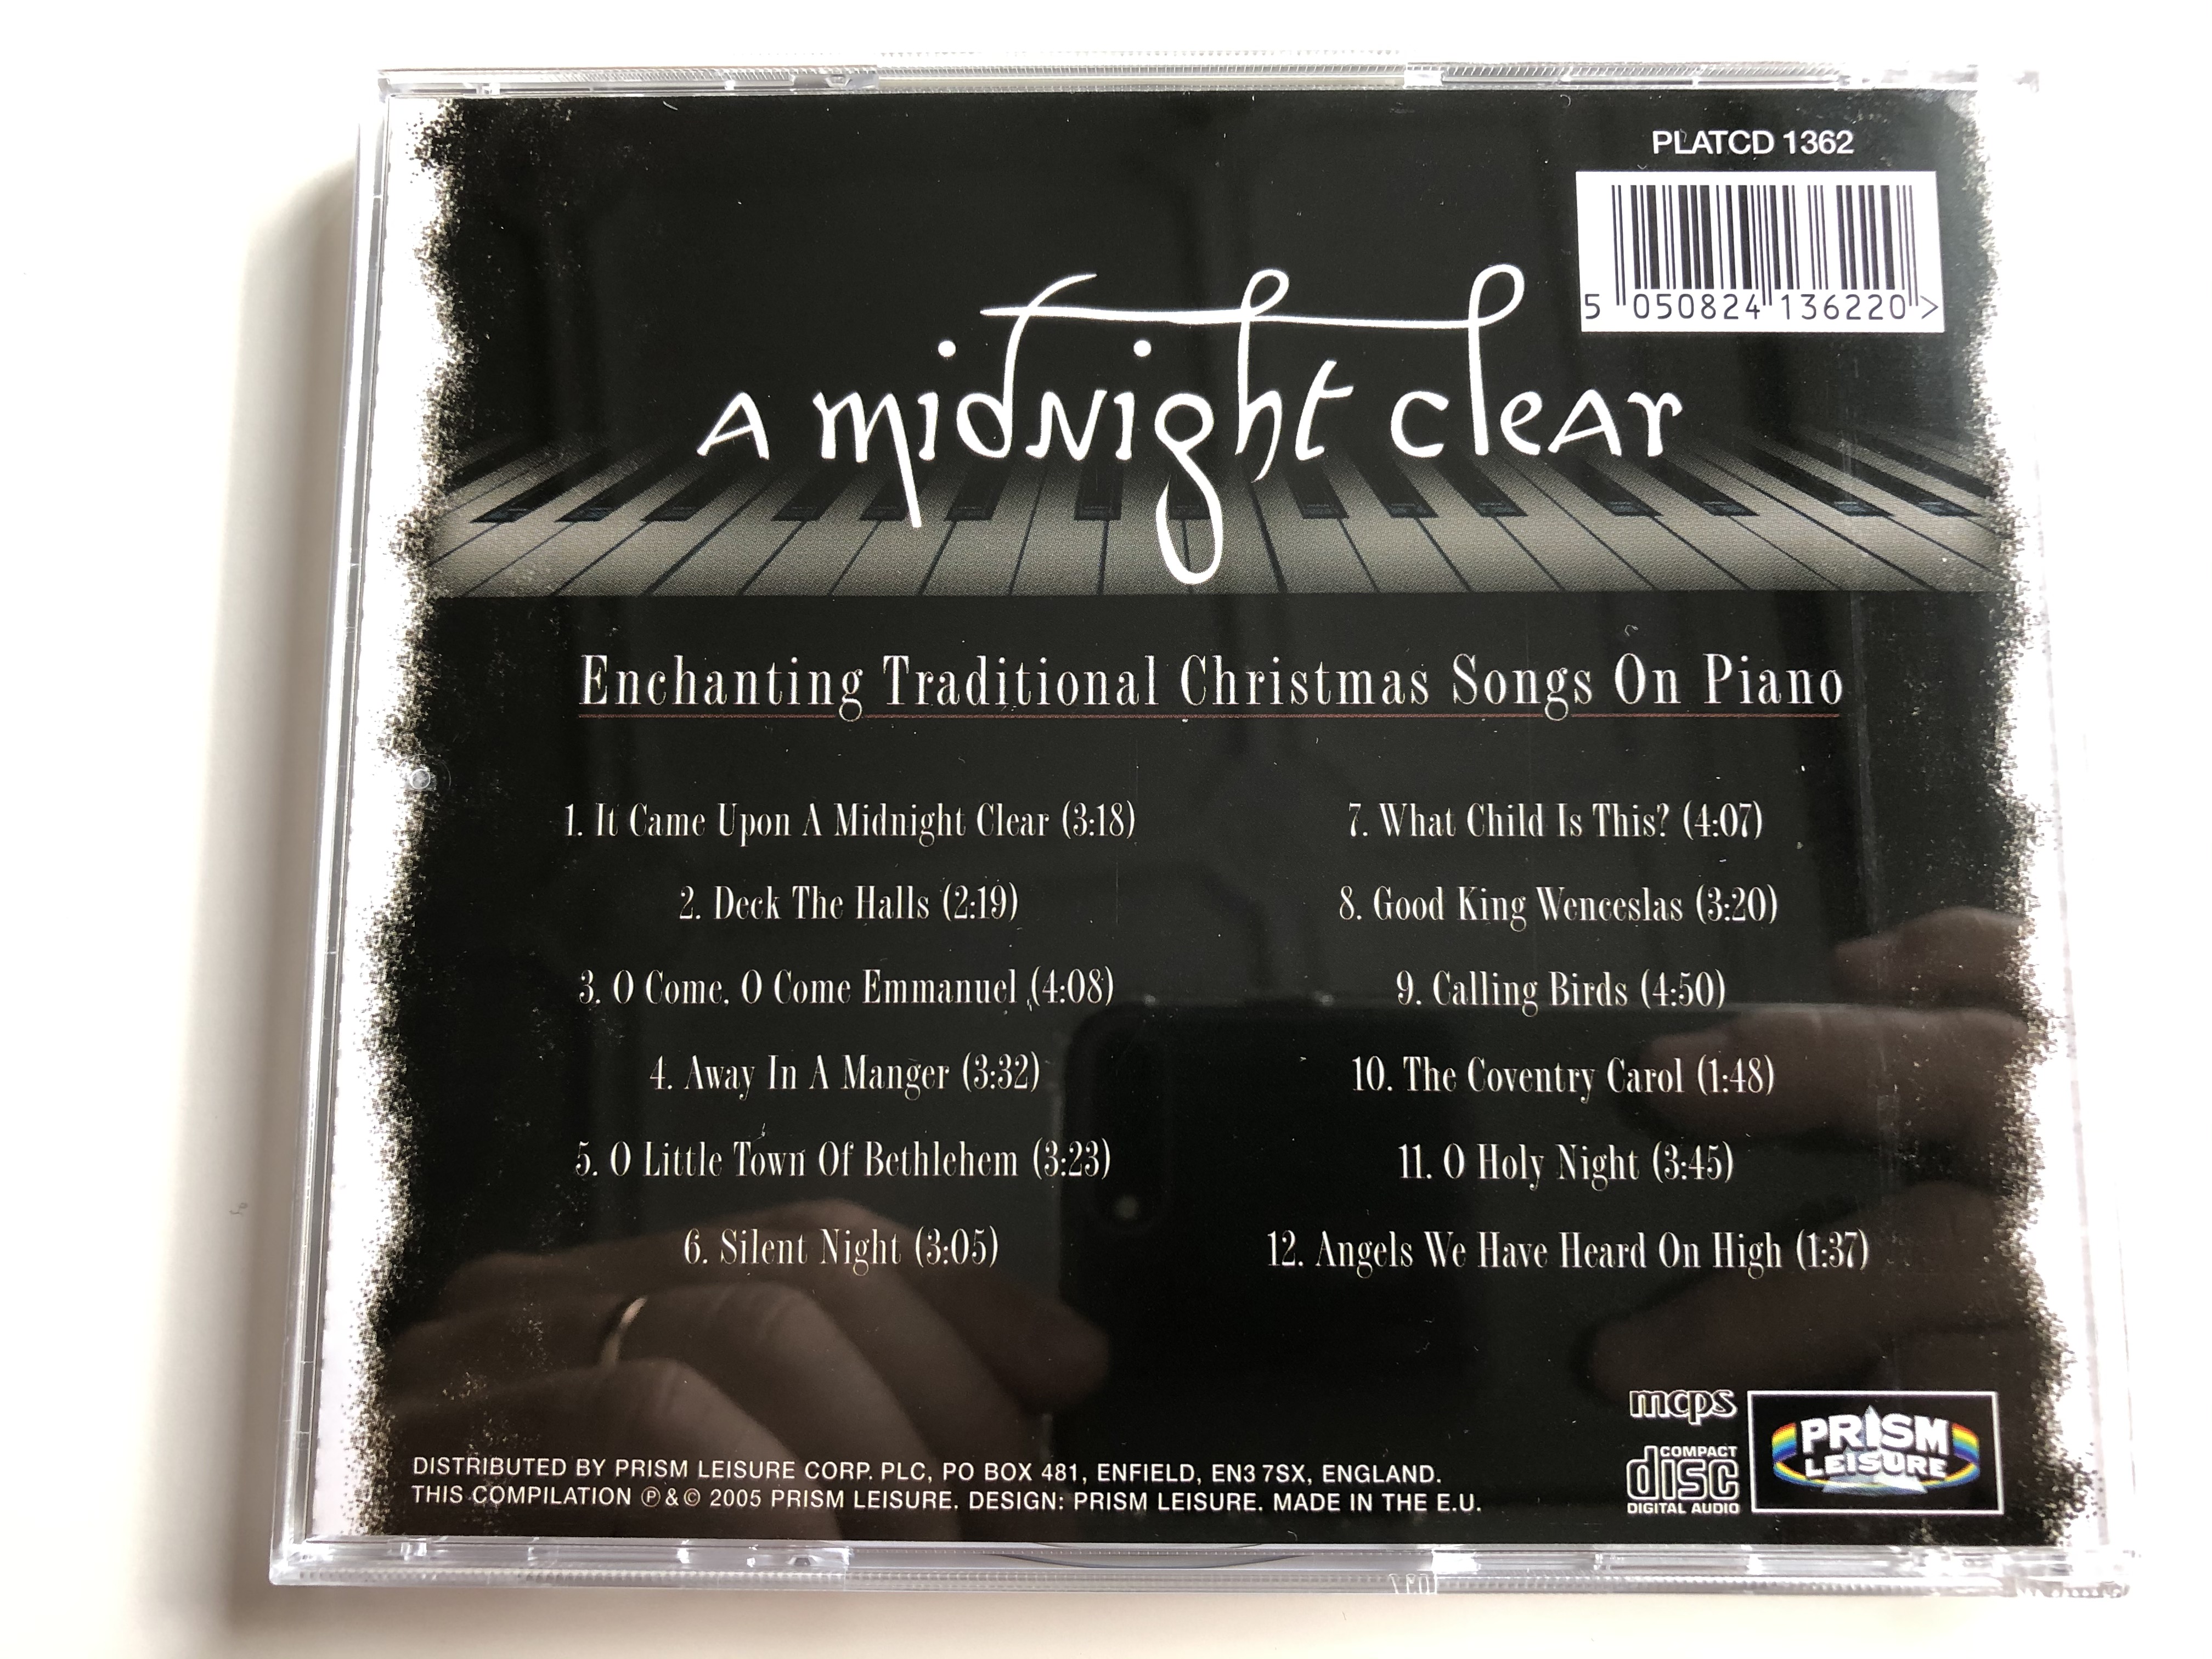 a-midnight-clear-enchanting-traditional-christmas-songs-on-piano-performed-by-john-nilsen-prism-leisure-audio-cd-2005-platcd-1362-4-.jpg